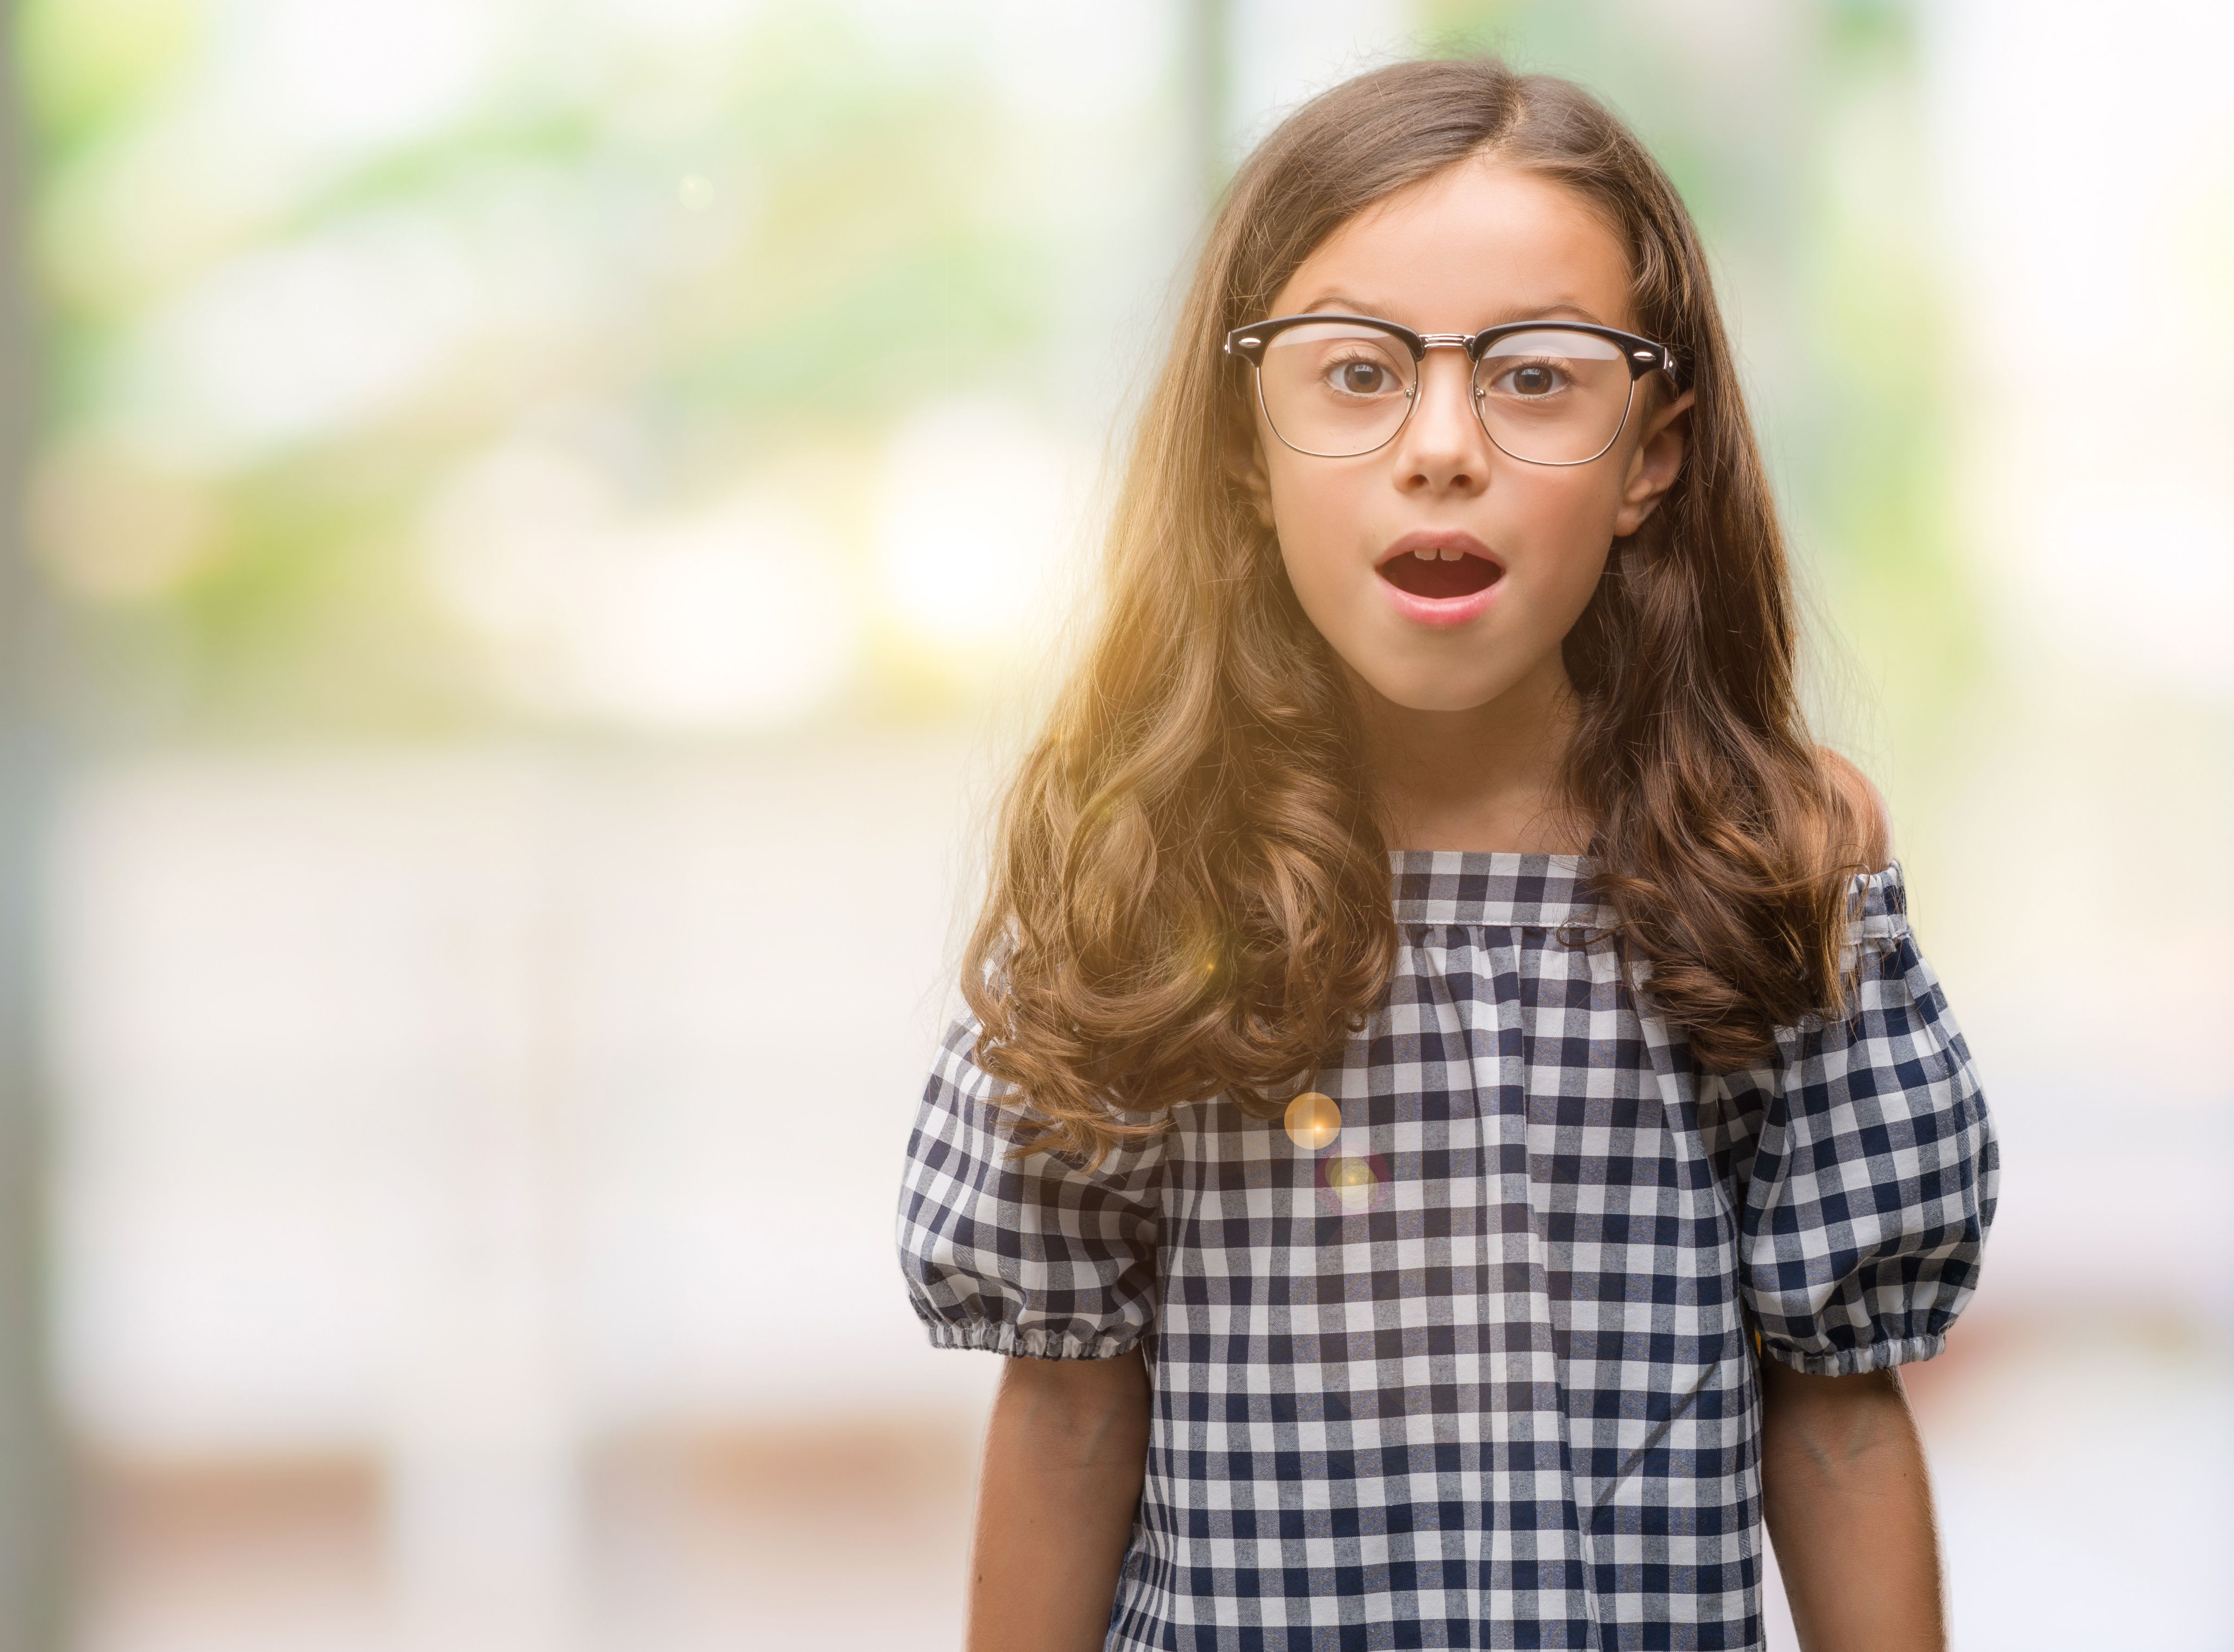 3 Facts About Myopia You Should Know